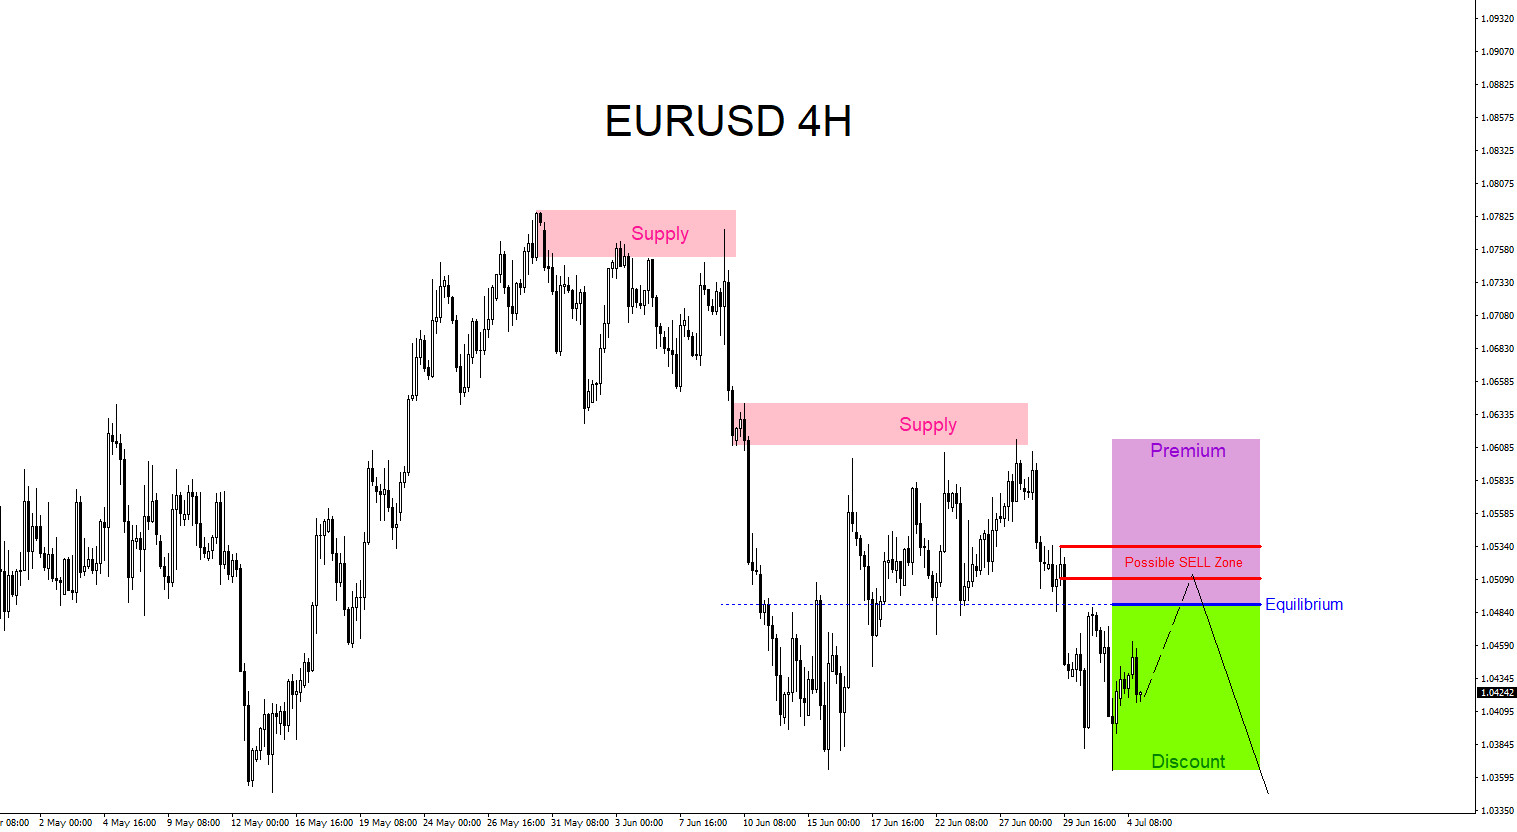 EURUSD : Watch for Selling Opportunities